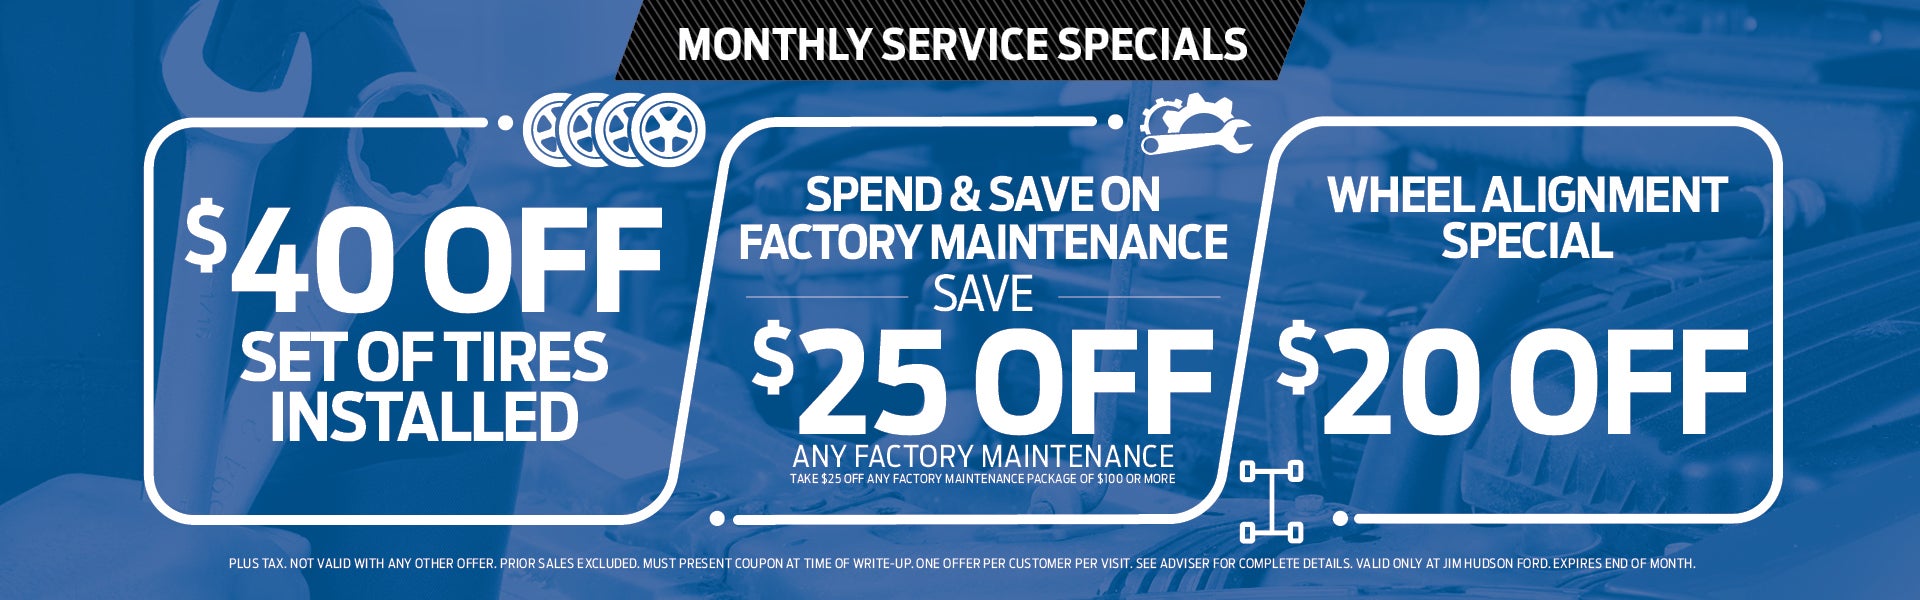 Don't Miss March Service Specials! 